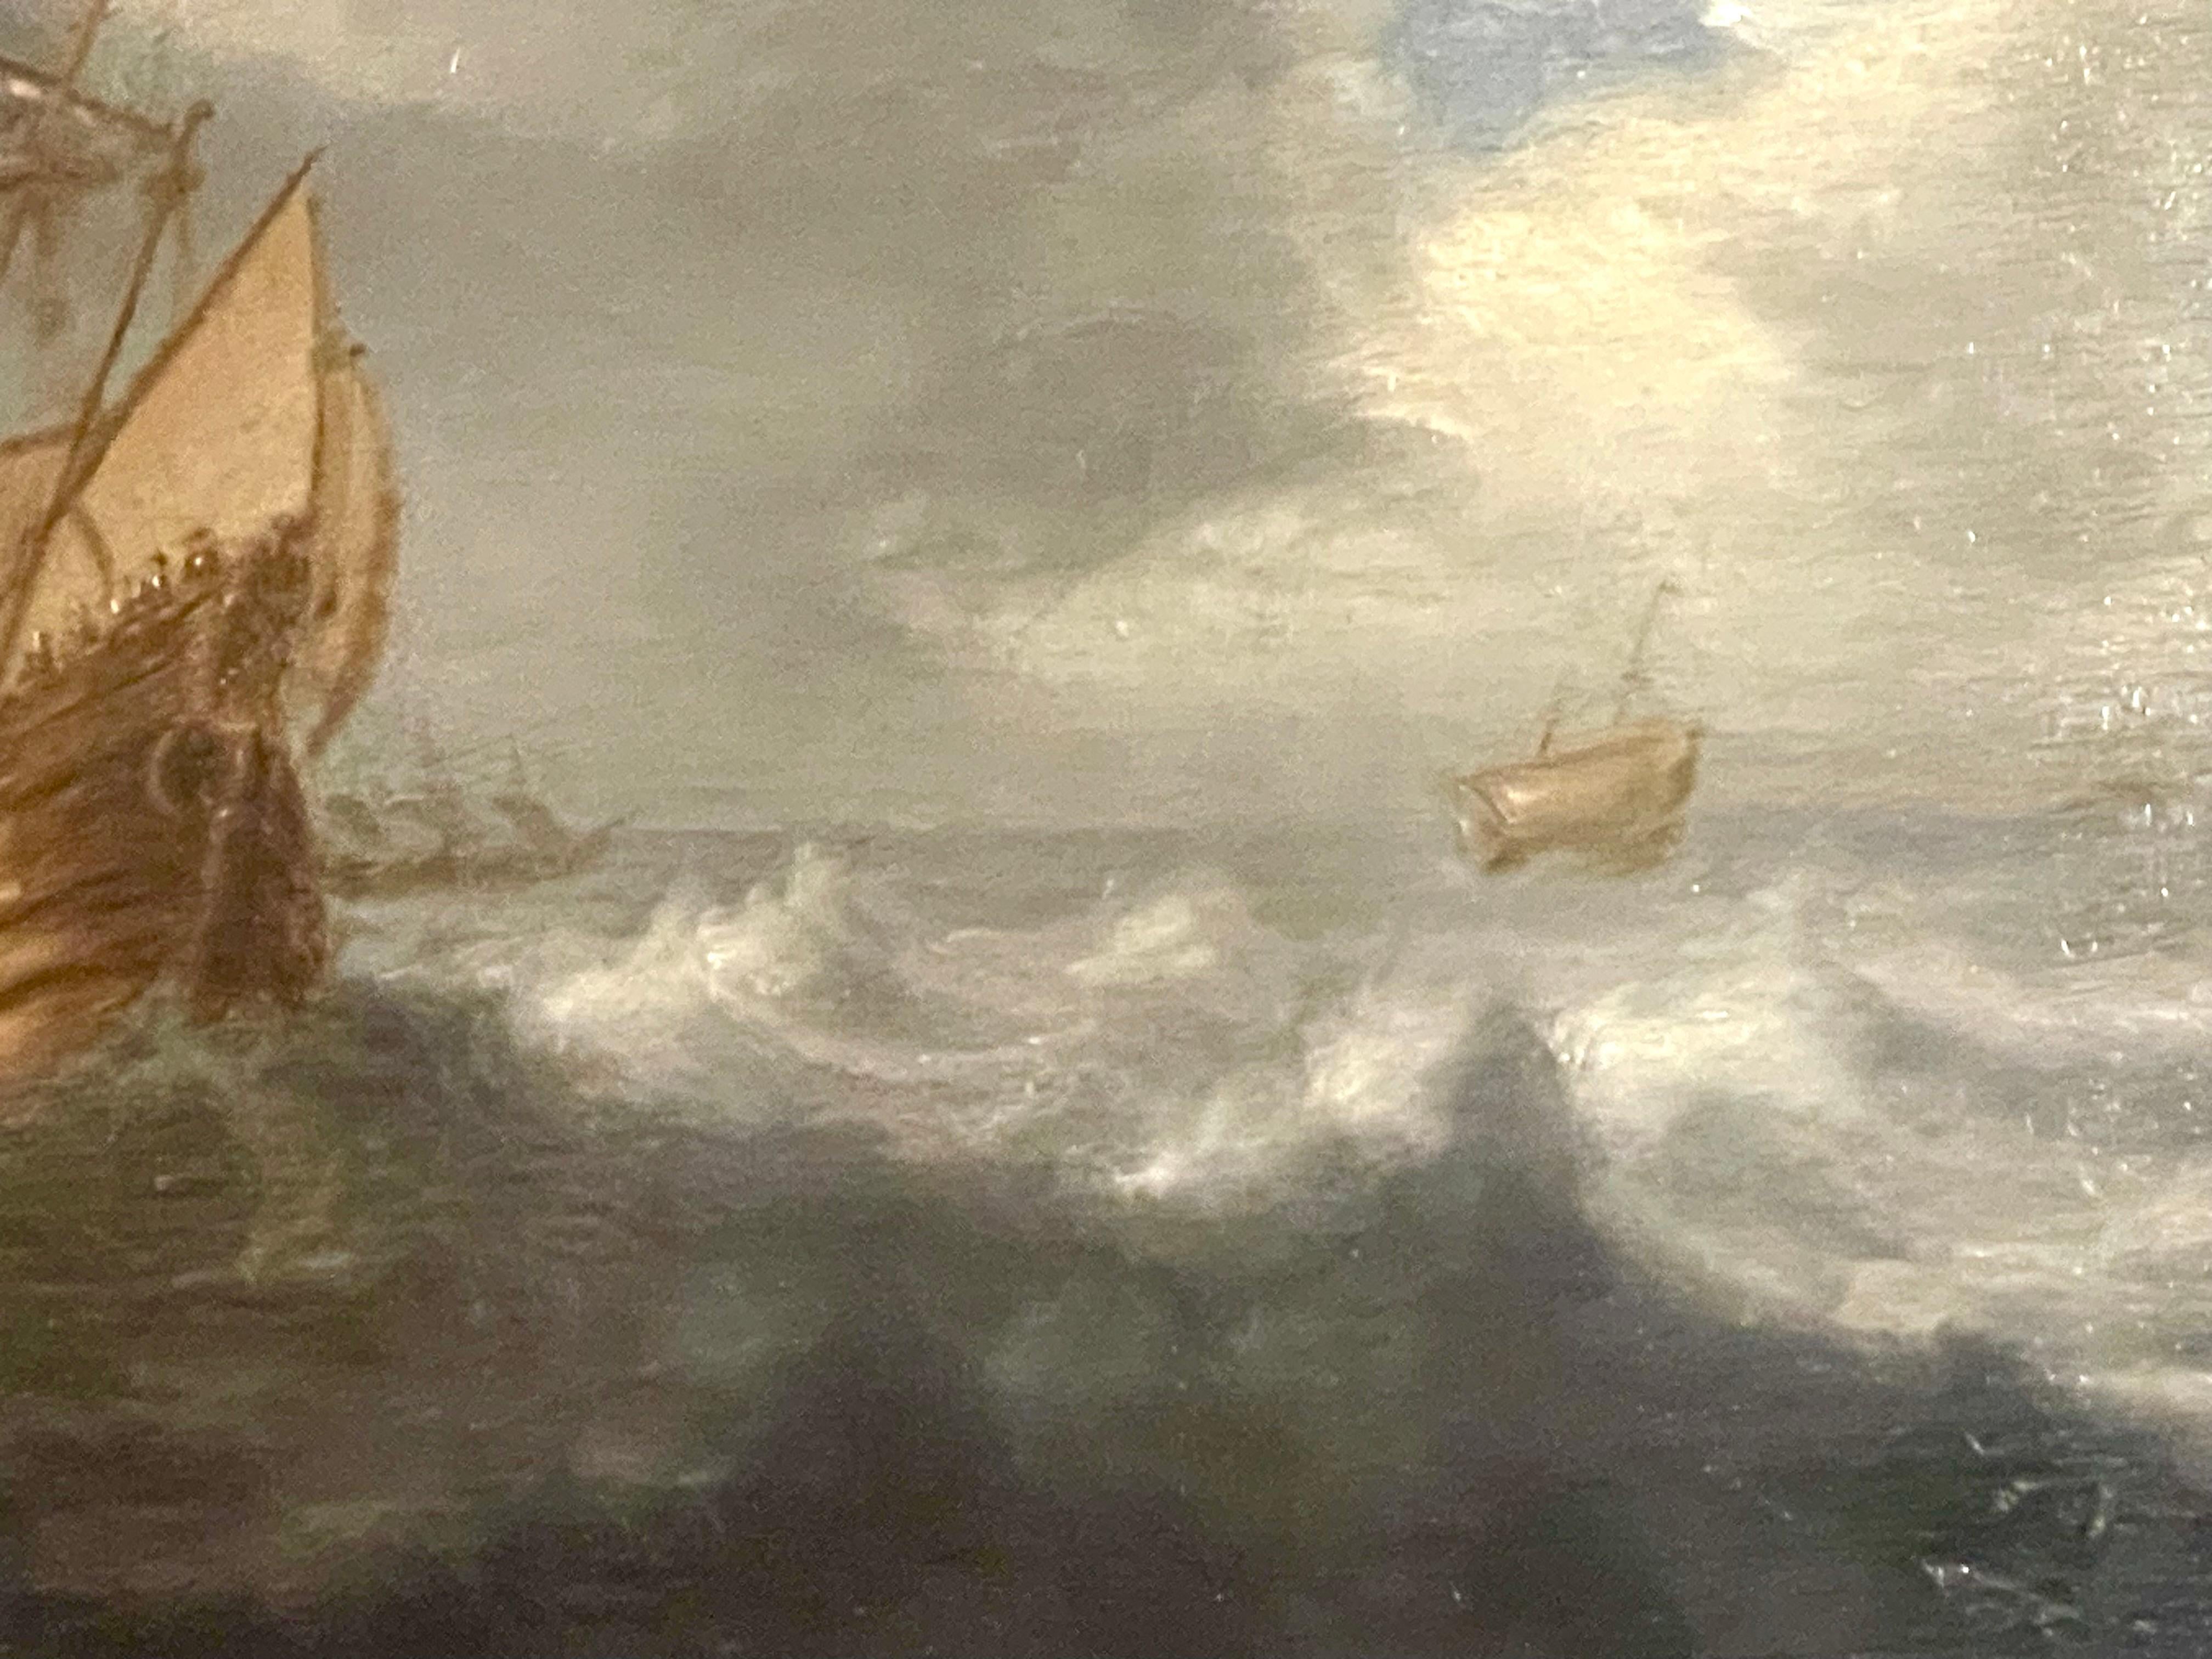 Dutch School, 17th century oil painting on board, this work features a golden ship on blue seas with white crests against a stormy clouded sky.  In the distance more ships can be seen, and a spot of blue sky gives the stormy clouds relief.  Light